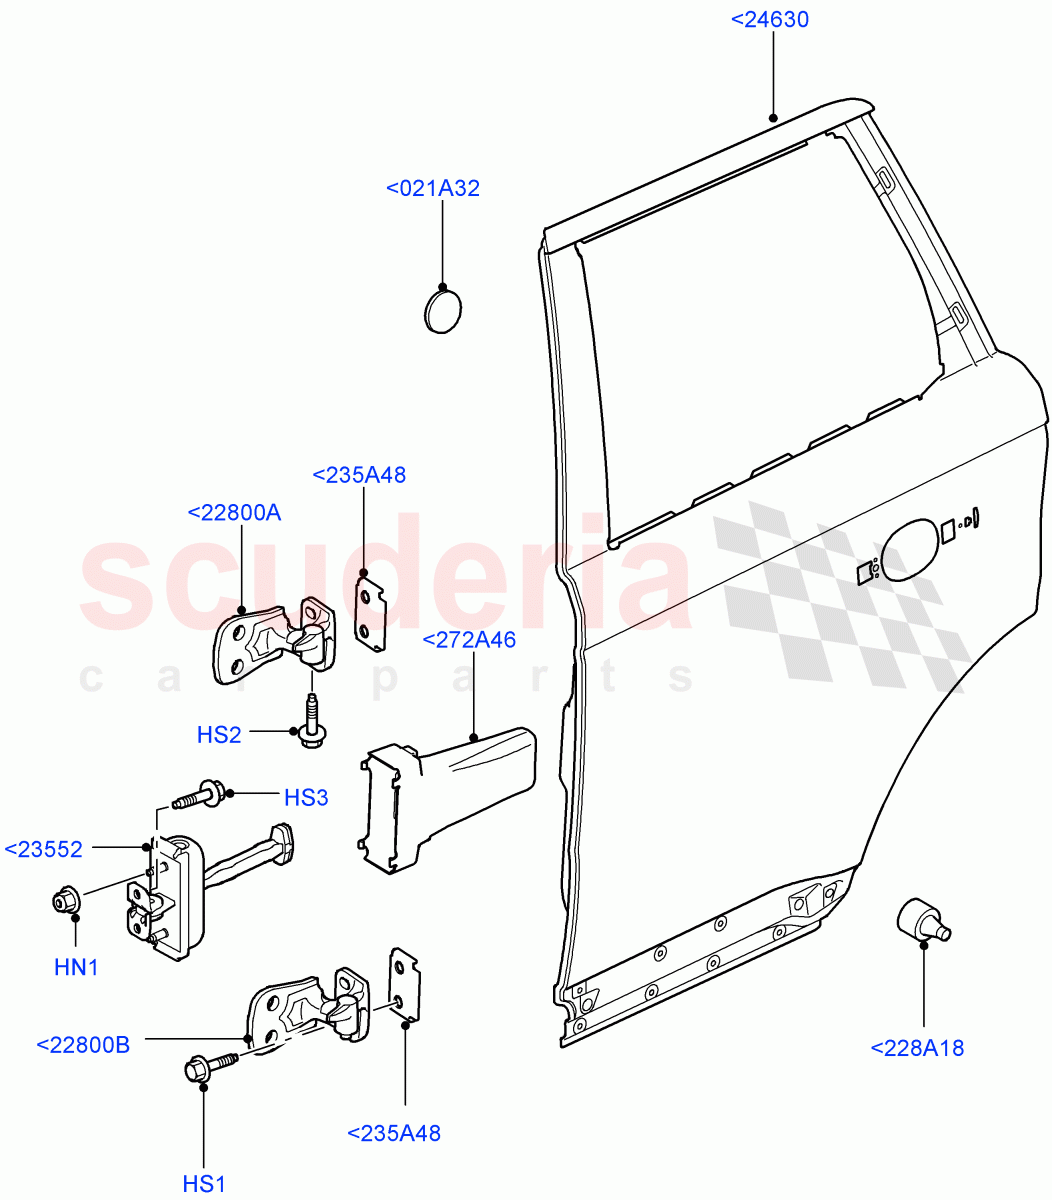 Rear Doors, Hinges & Weatherstrips(Door And Fixings)((V)TO9A999999) of Land Rover Land Rover Range Rover Sport (2005-2009) [4.2 Petrol V8 Supercharged]